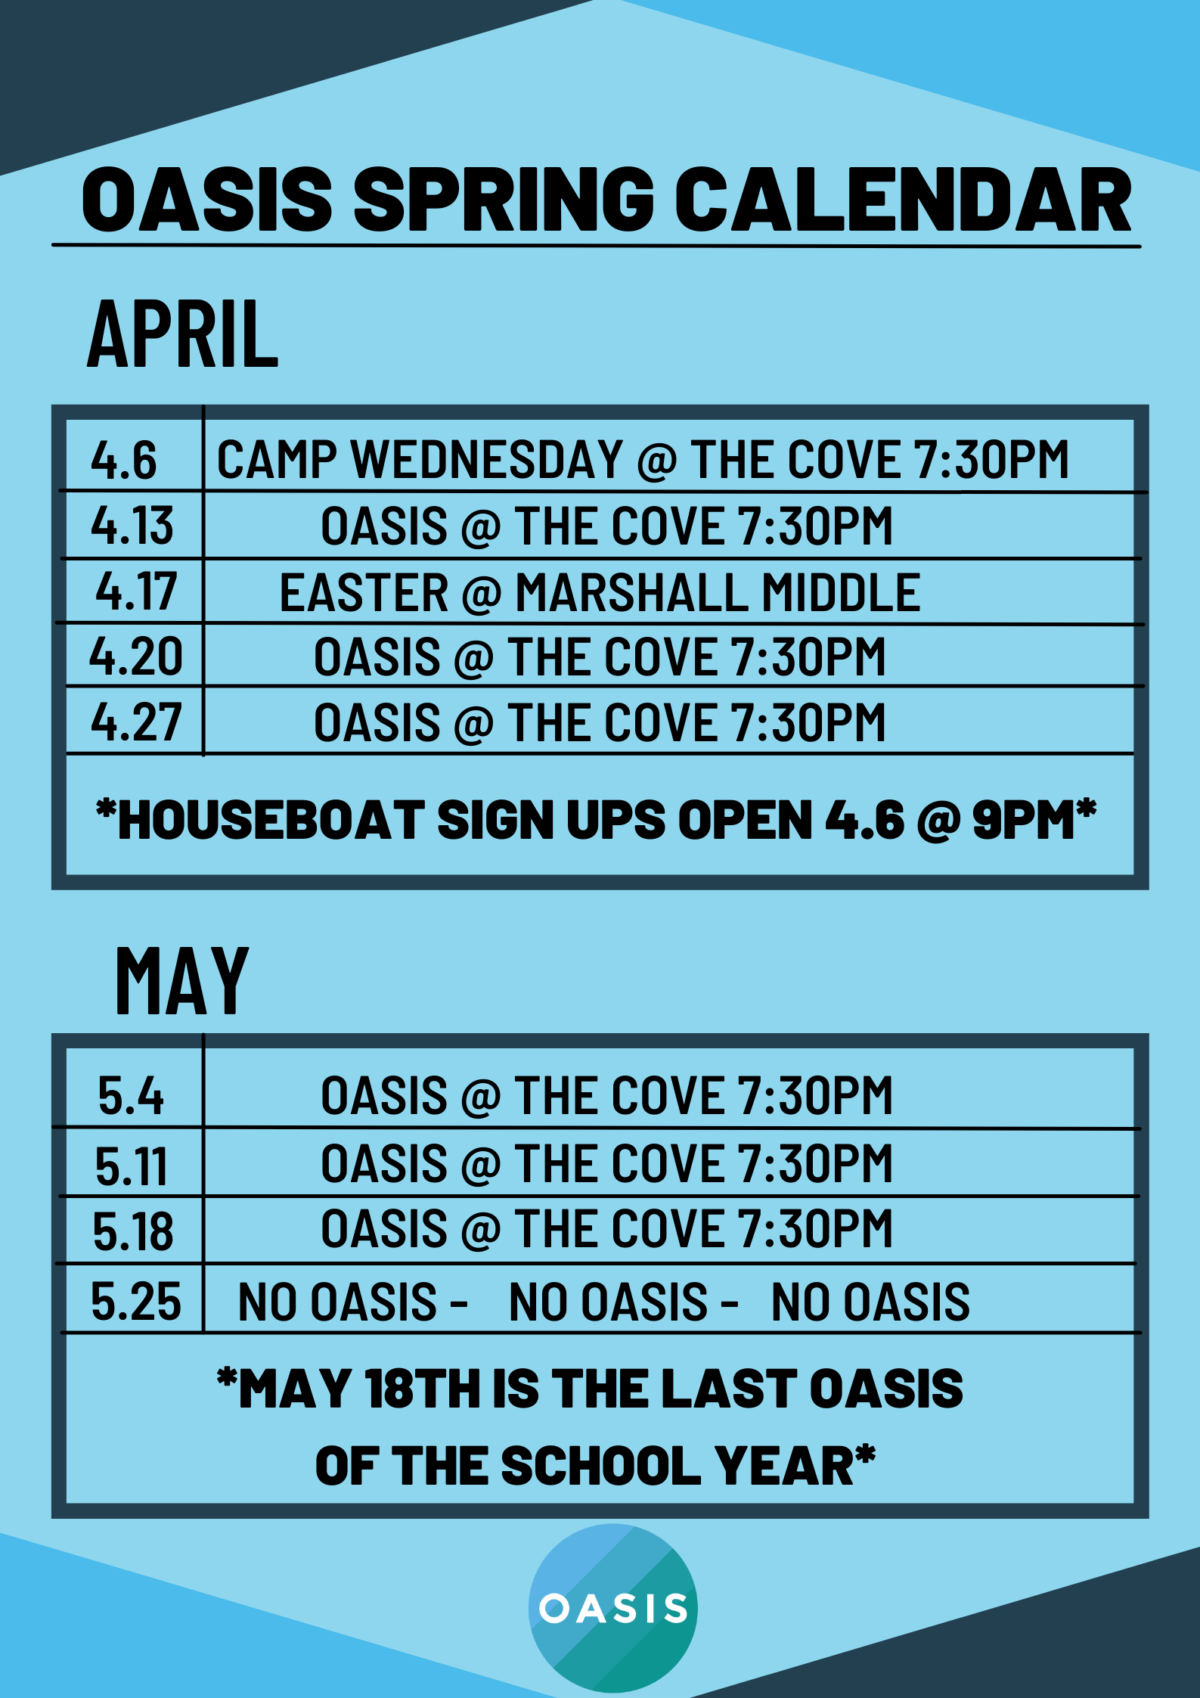 OASIS Wednesday 4/20 HOUSEBOATS SIGN UPS Oasis In the Water